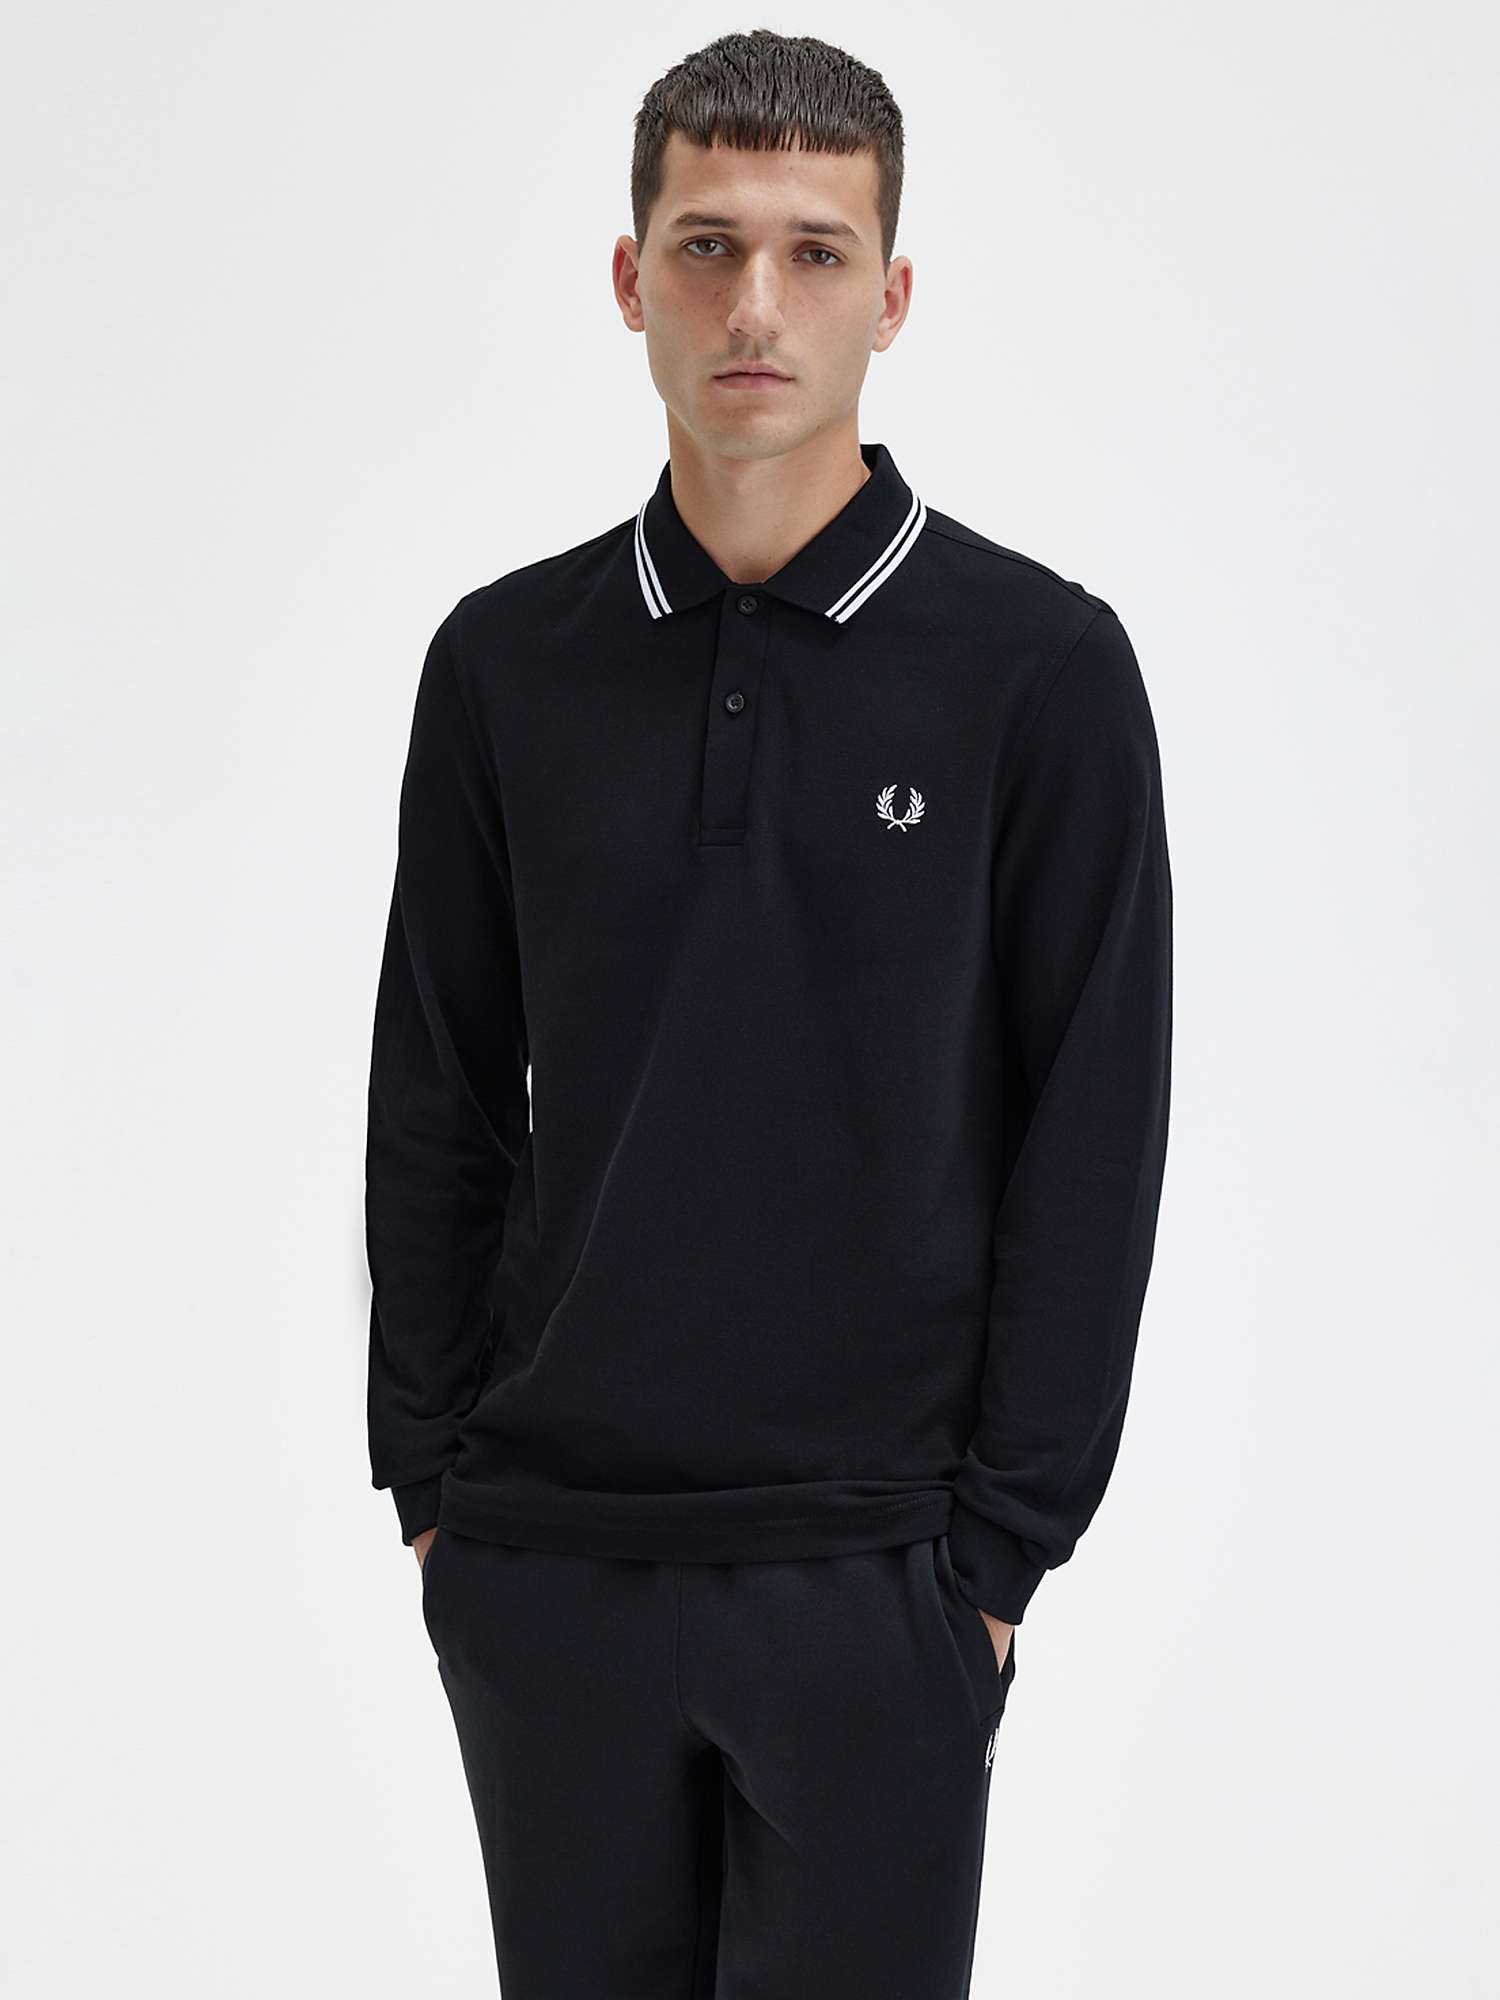 Buy Fred Perry Twin Tipped Long Sleeve Polo Shirt Online at johnlewis.com